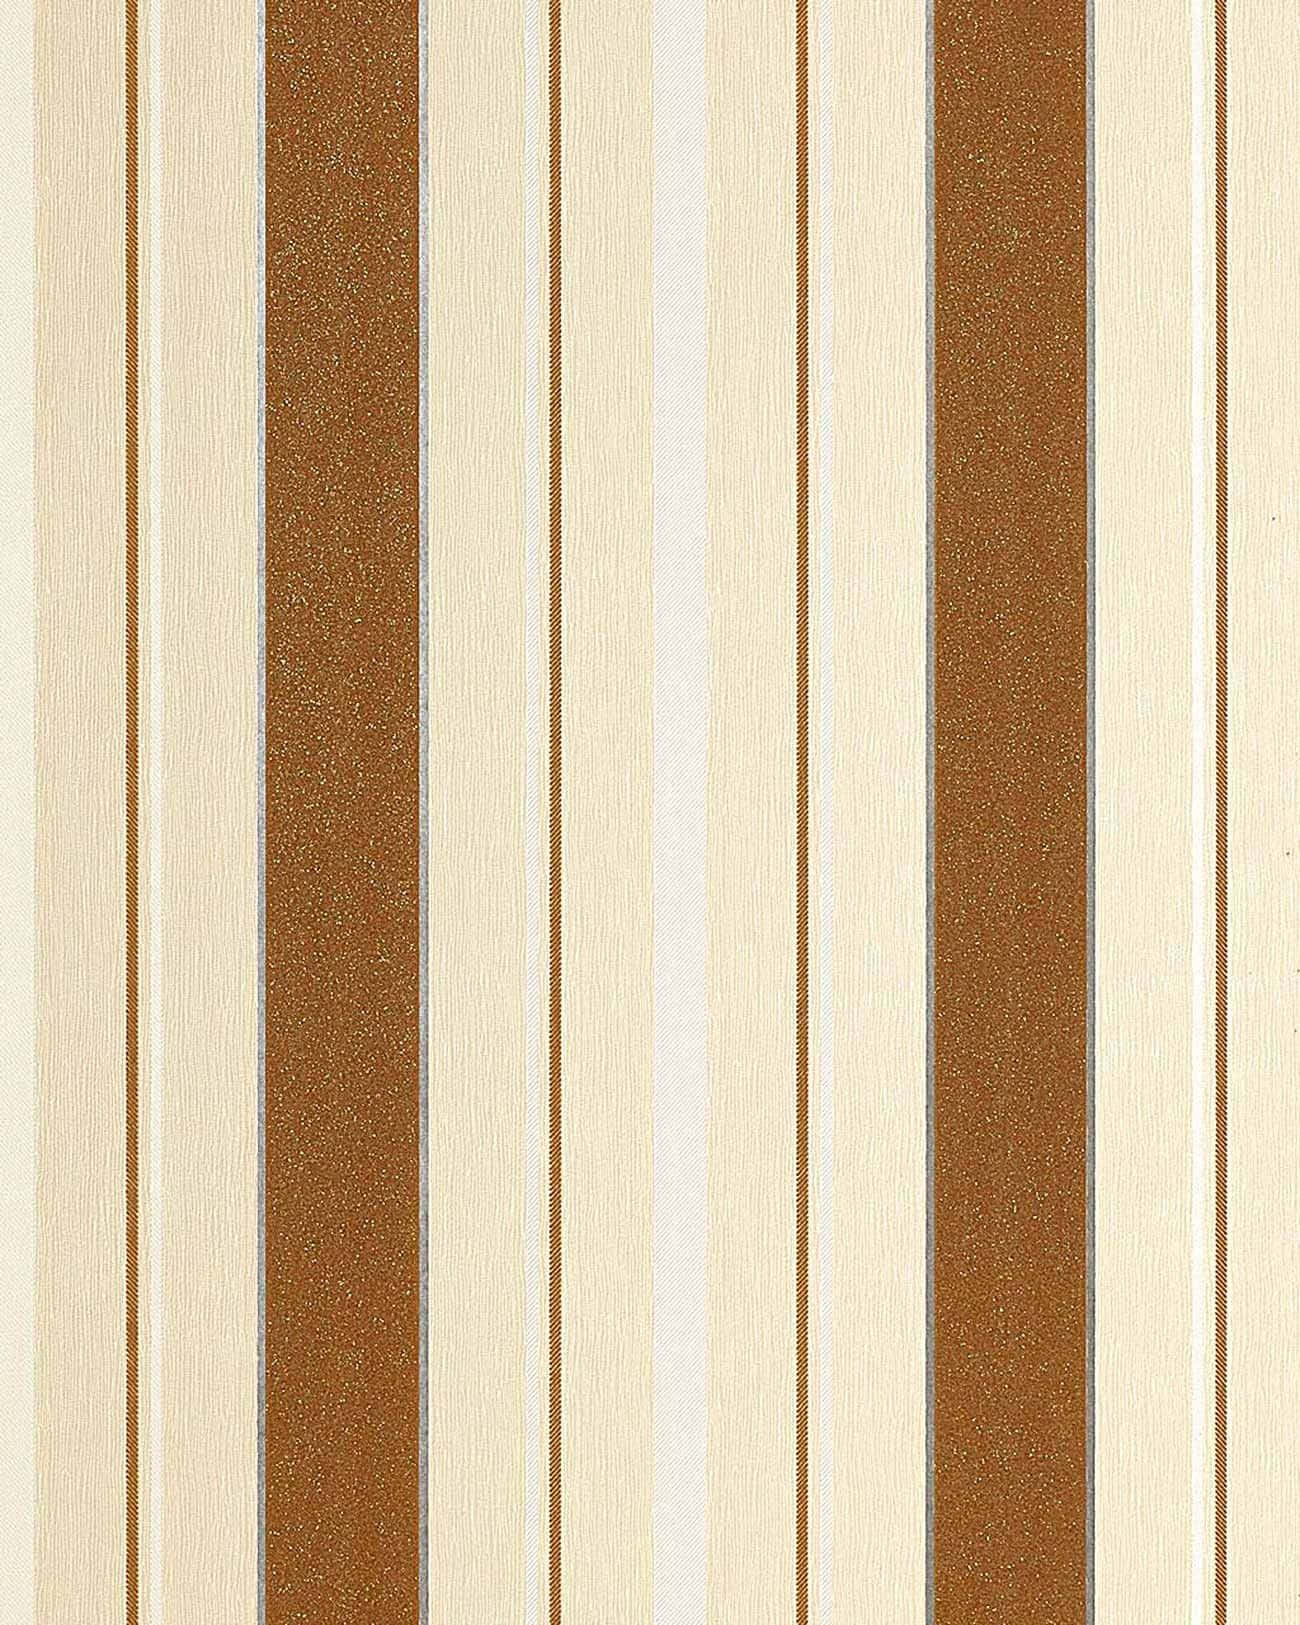 Smooth contrast of Brown and White Wallpaper